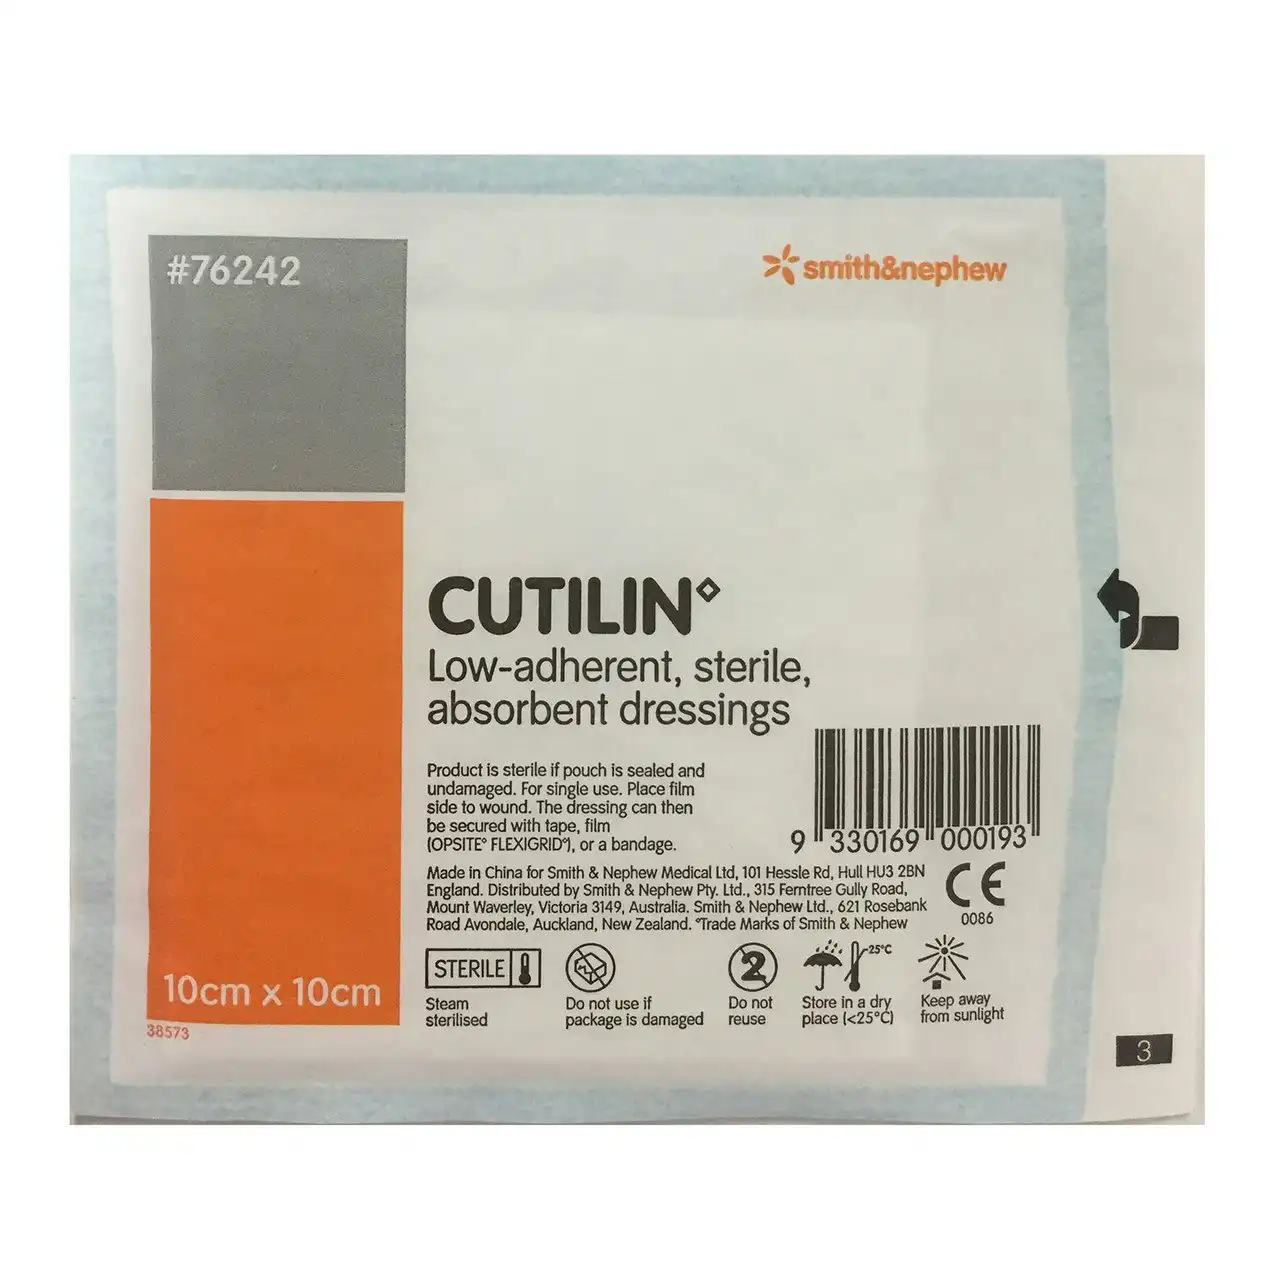 Cutilin Low-Adherent Sterile Absorbent Dressing 10cm x 10cm - Single Dressing (1 Pack)